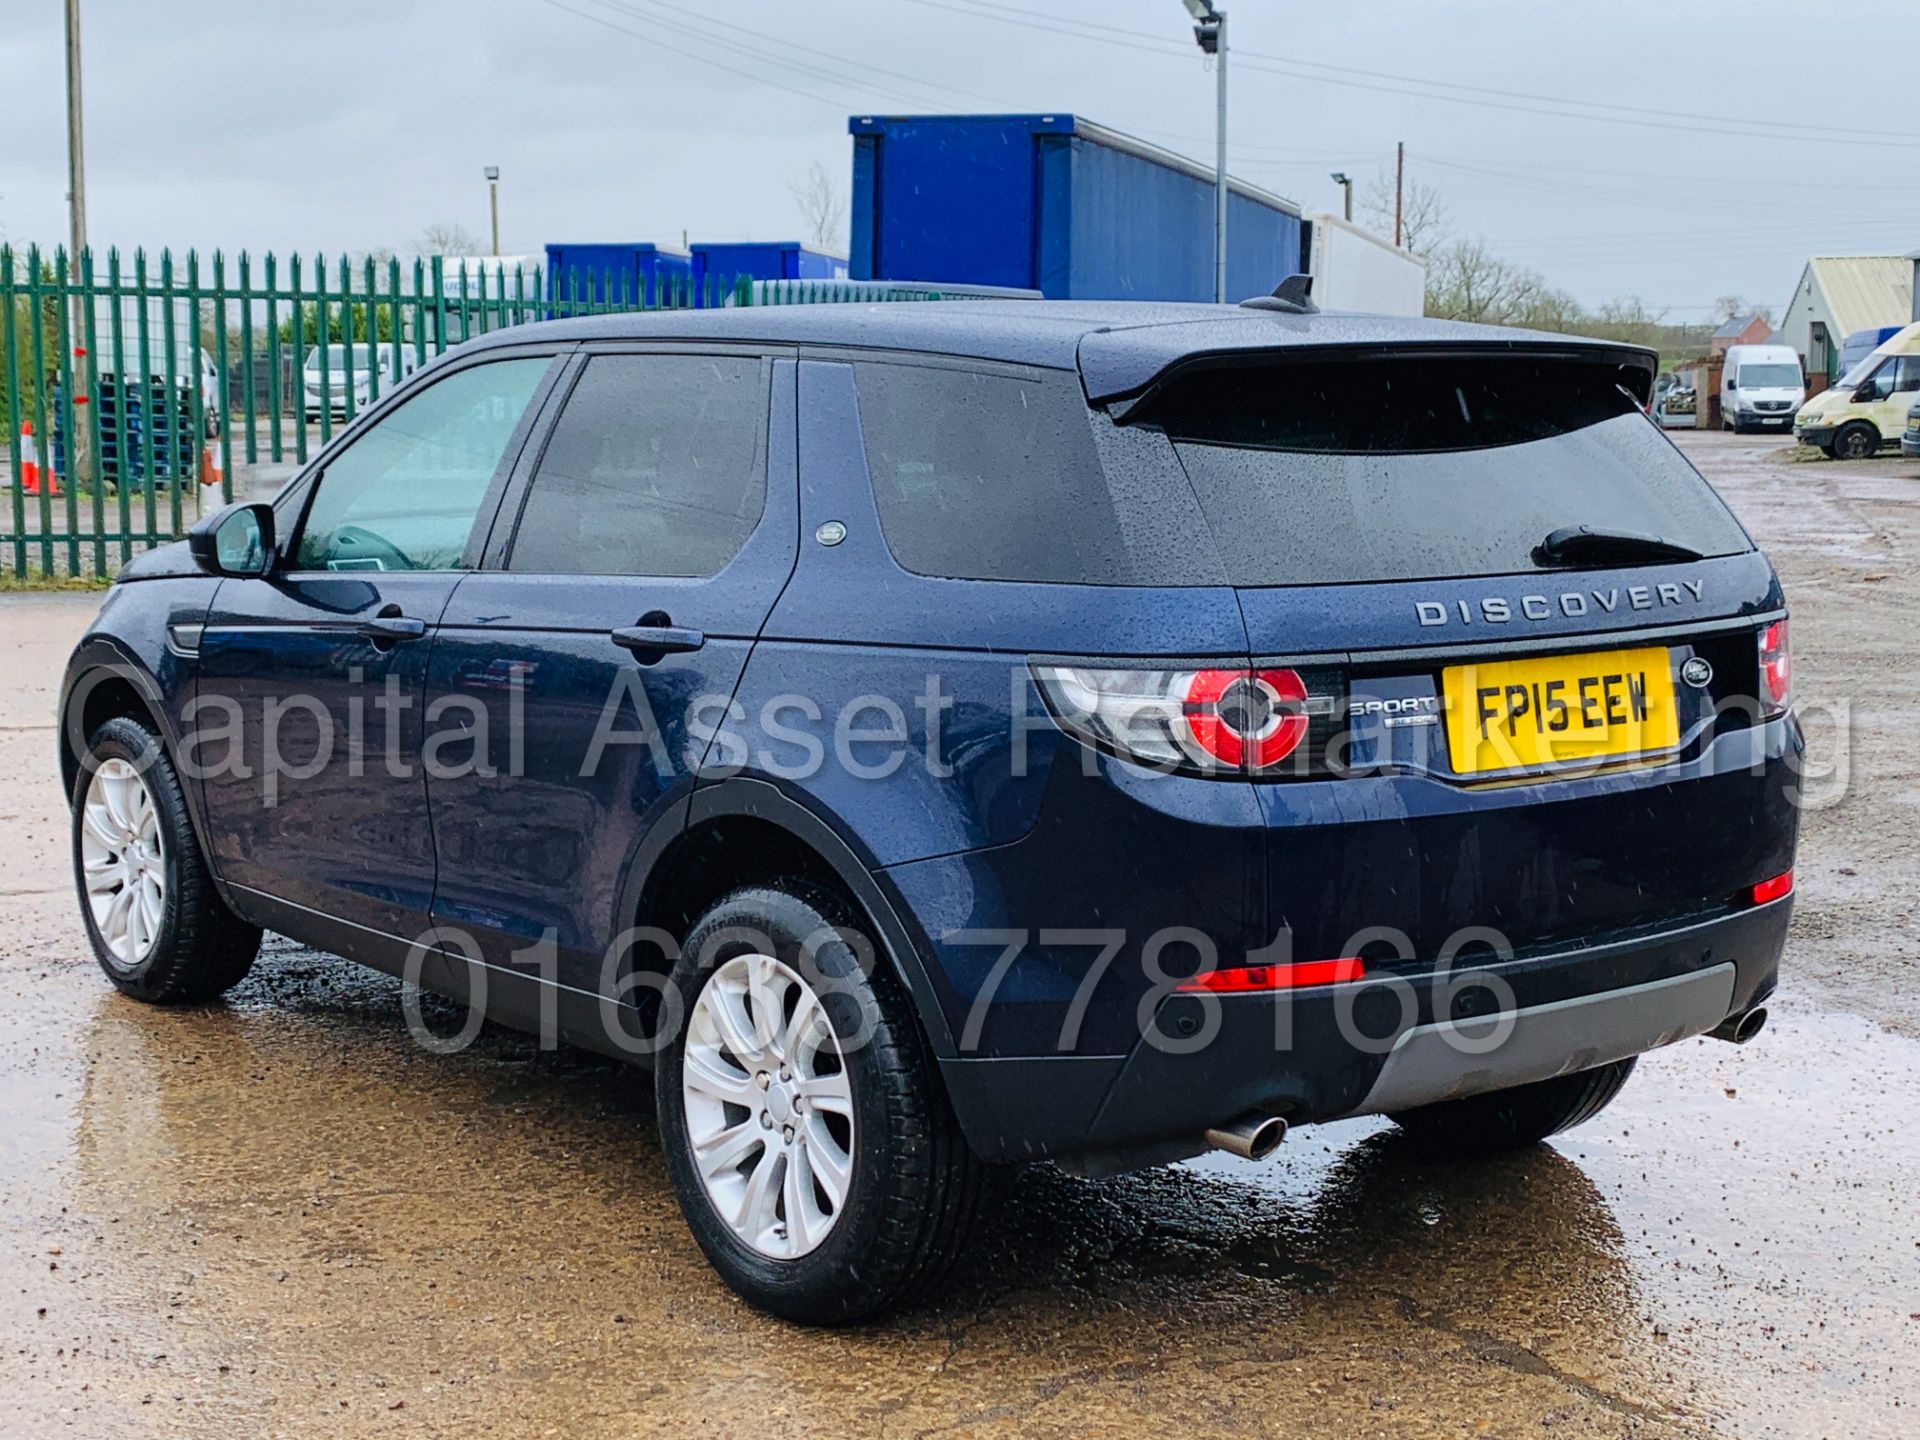 (On Sale) LAND ROVER DISCOVERY SPORT *SE TECH* 7 SEATER SUV (2015) '2.2 SD4-AUTO' *LEATHER-SAT NAV* - Image 11 of 57